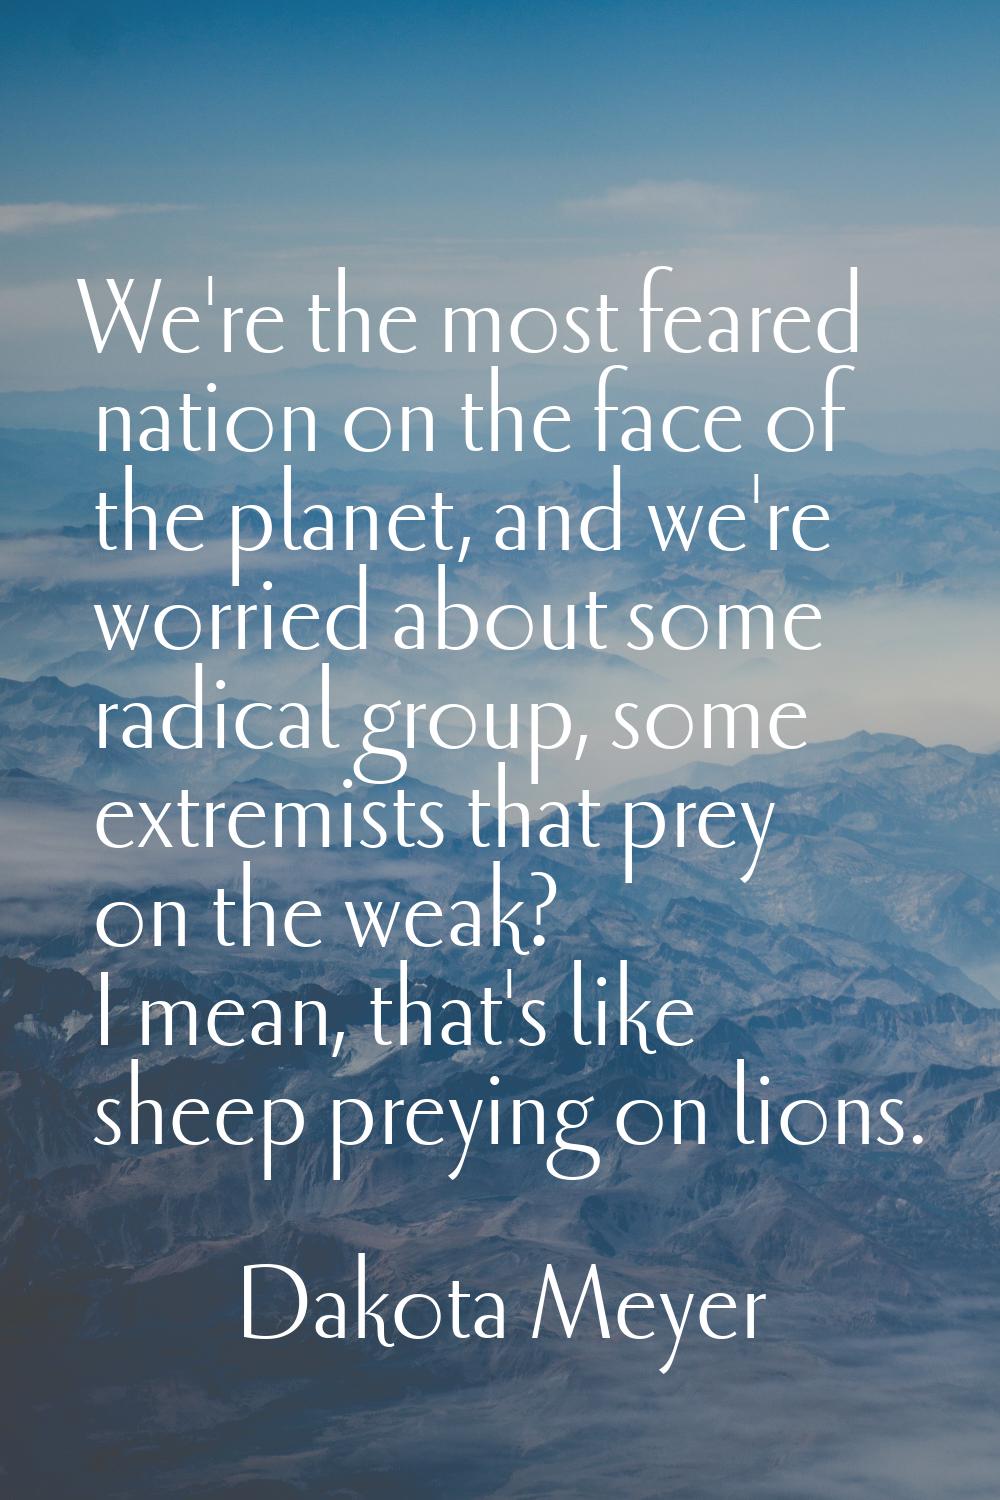 We're the most feared nation on the face of the planet, and we're worried about some radical group,